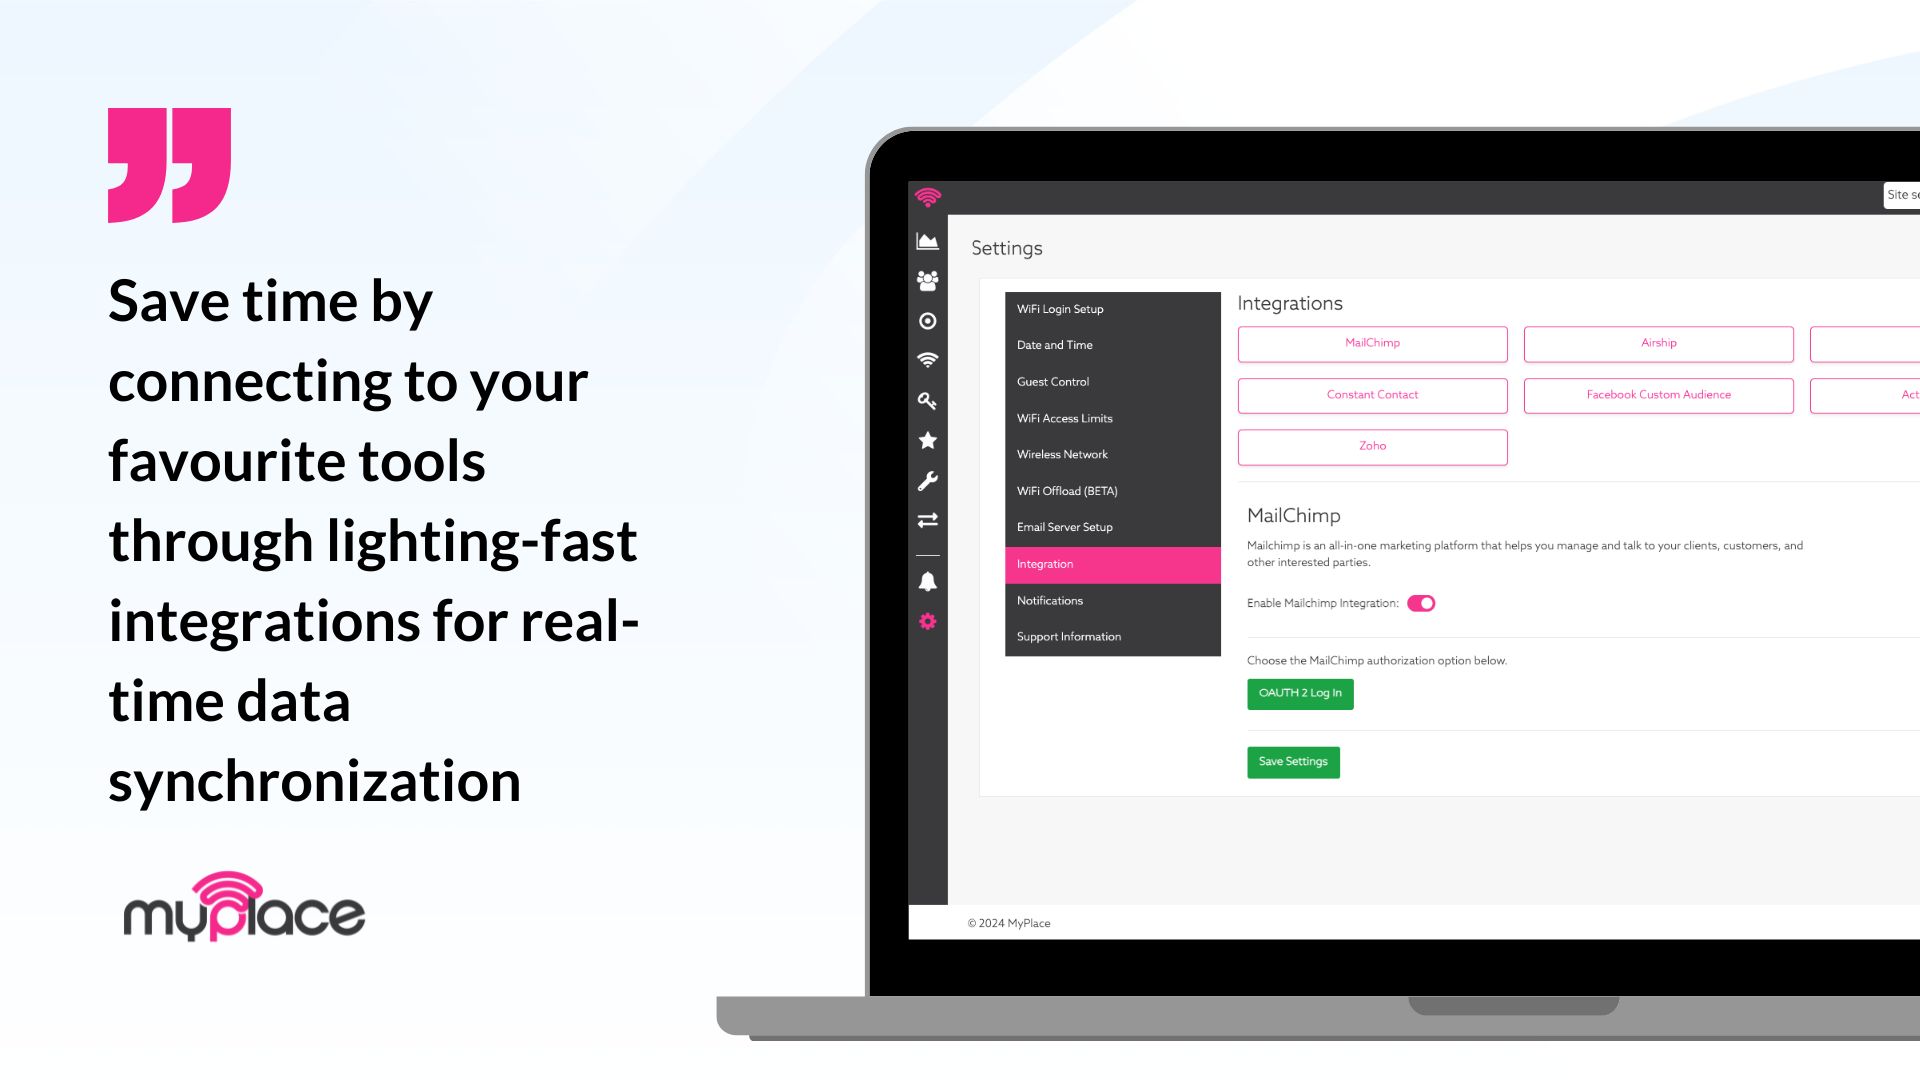 Save time by connecting to your favourite tools through lighting-fast integrations for real-time data synchronization